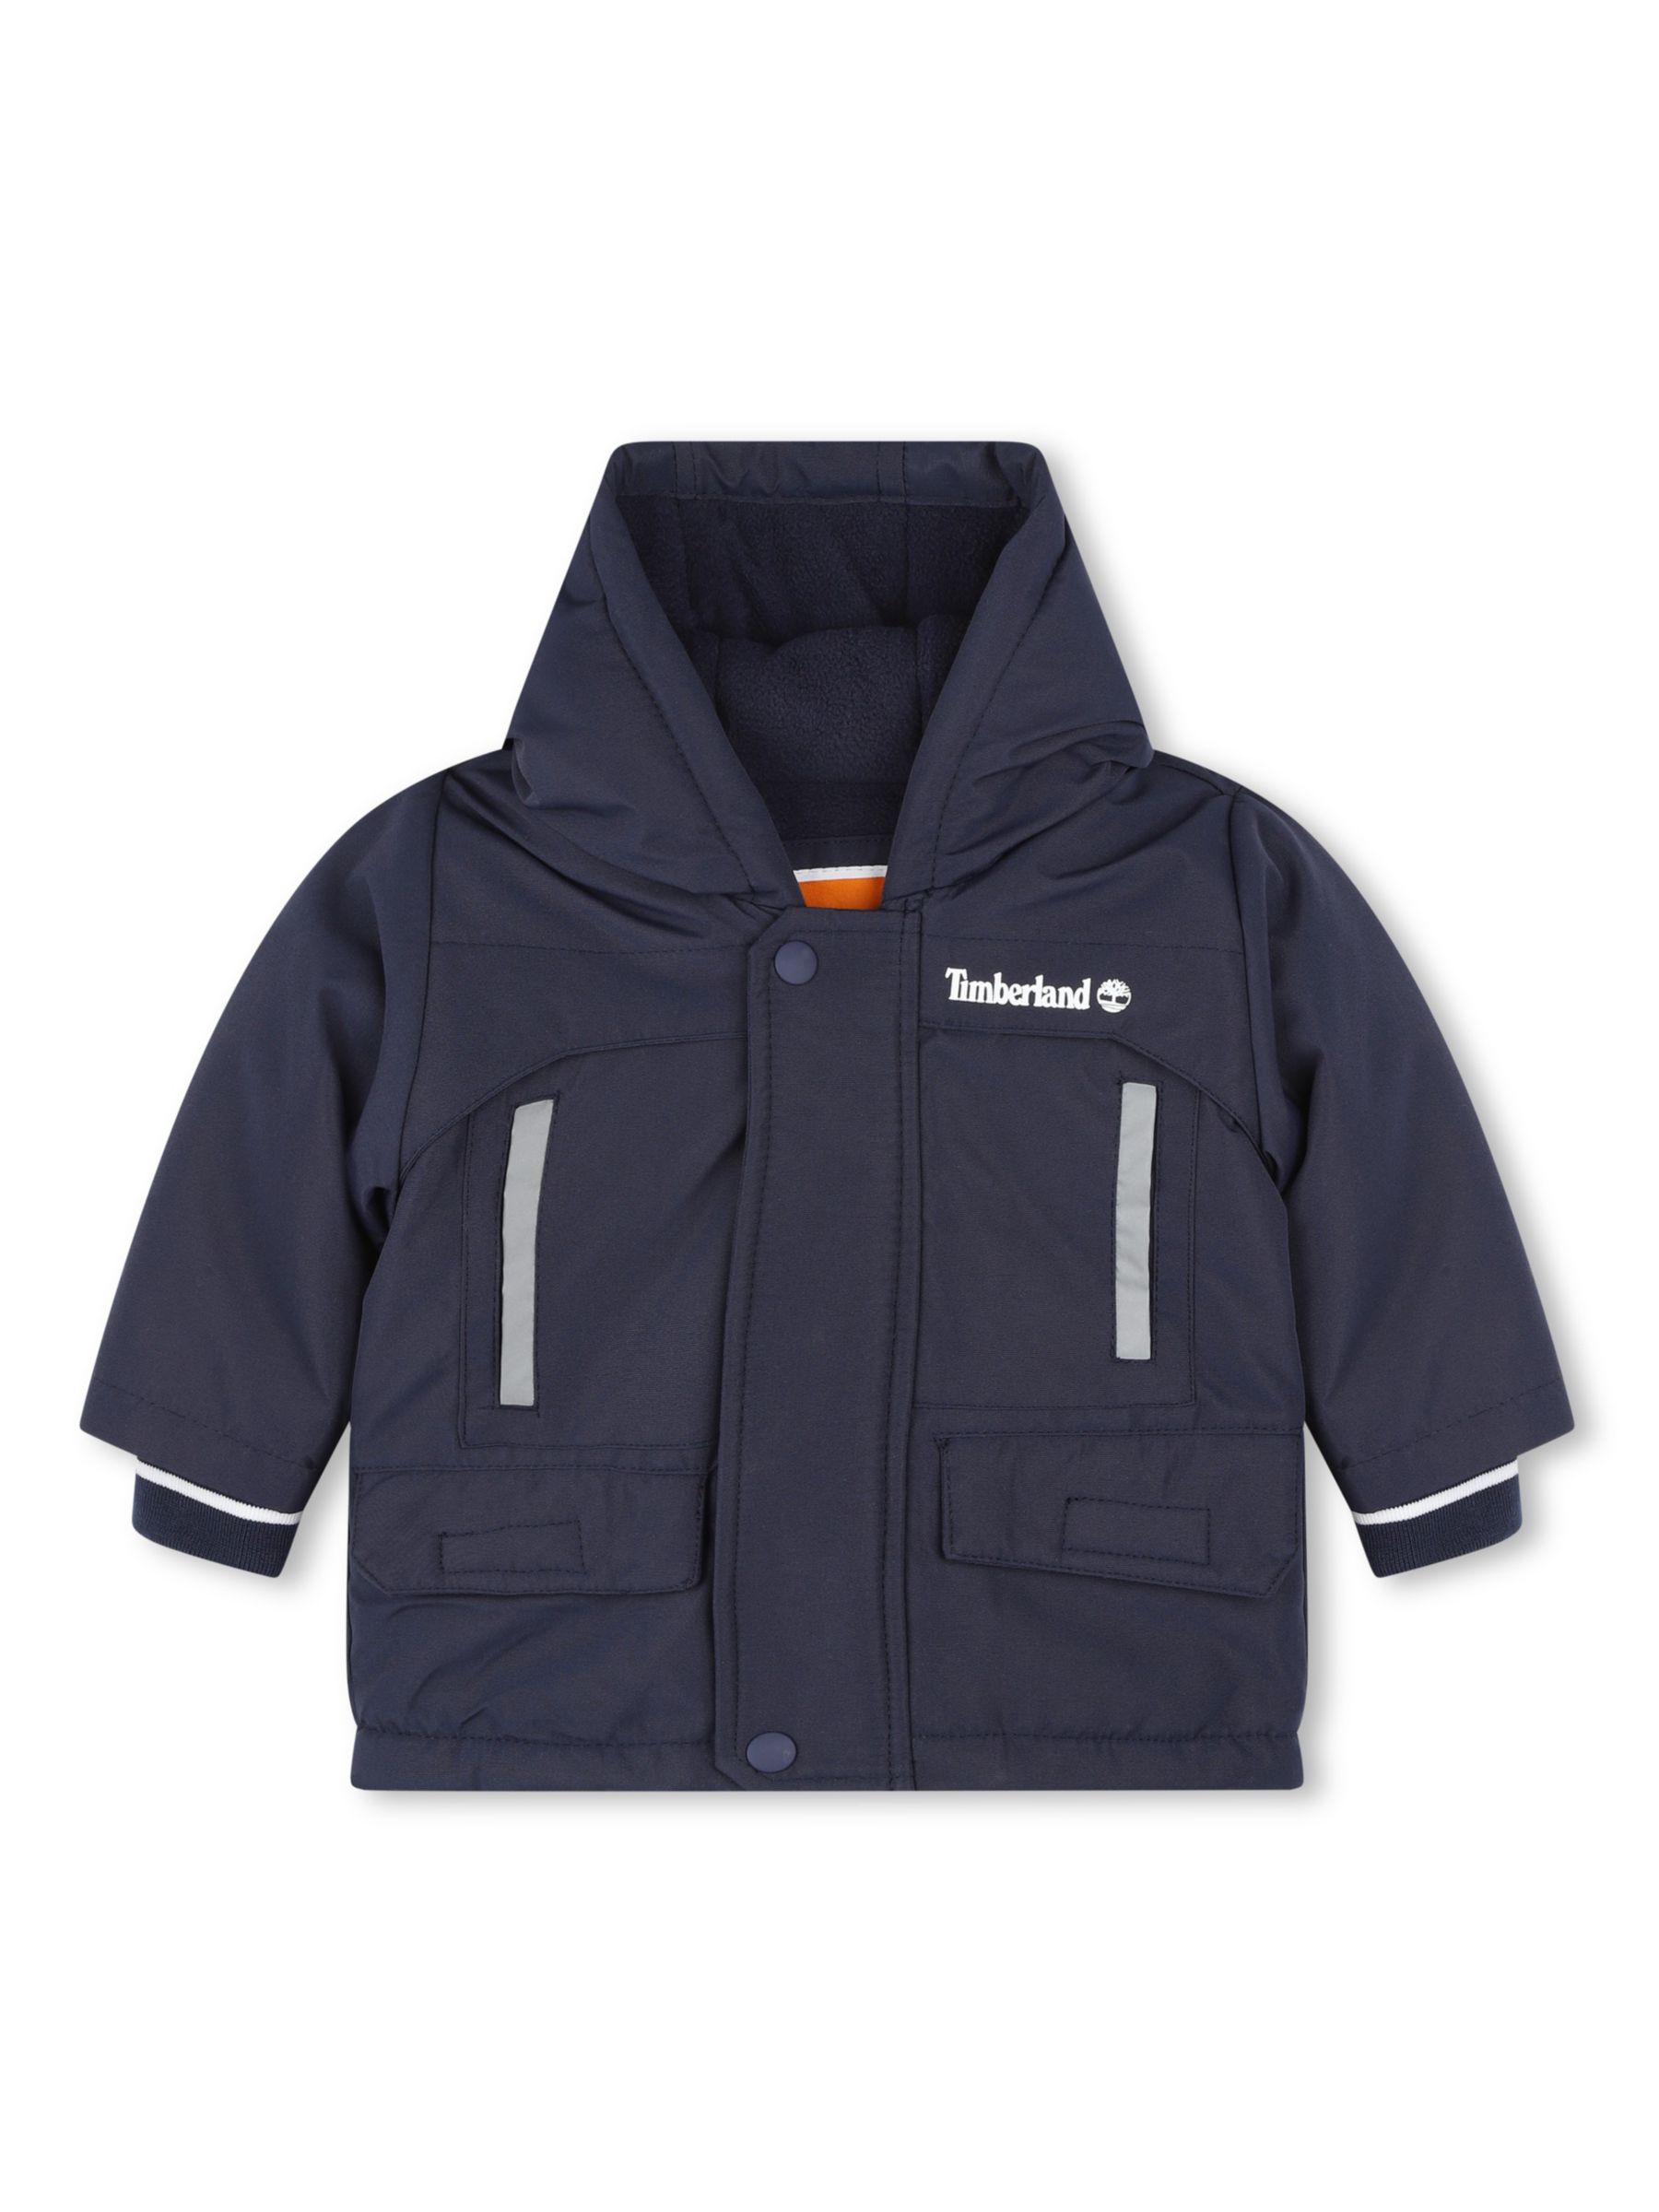 Timberland Baby Fleece Lined Parka, Navy, 4 years